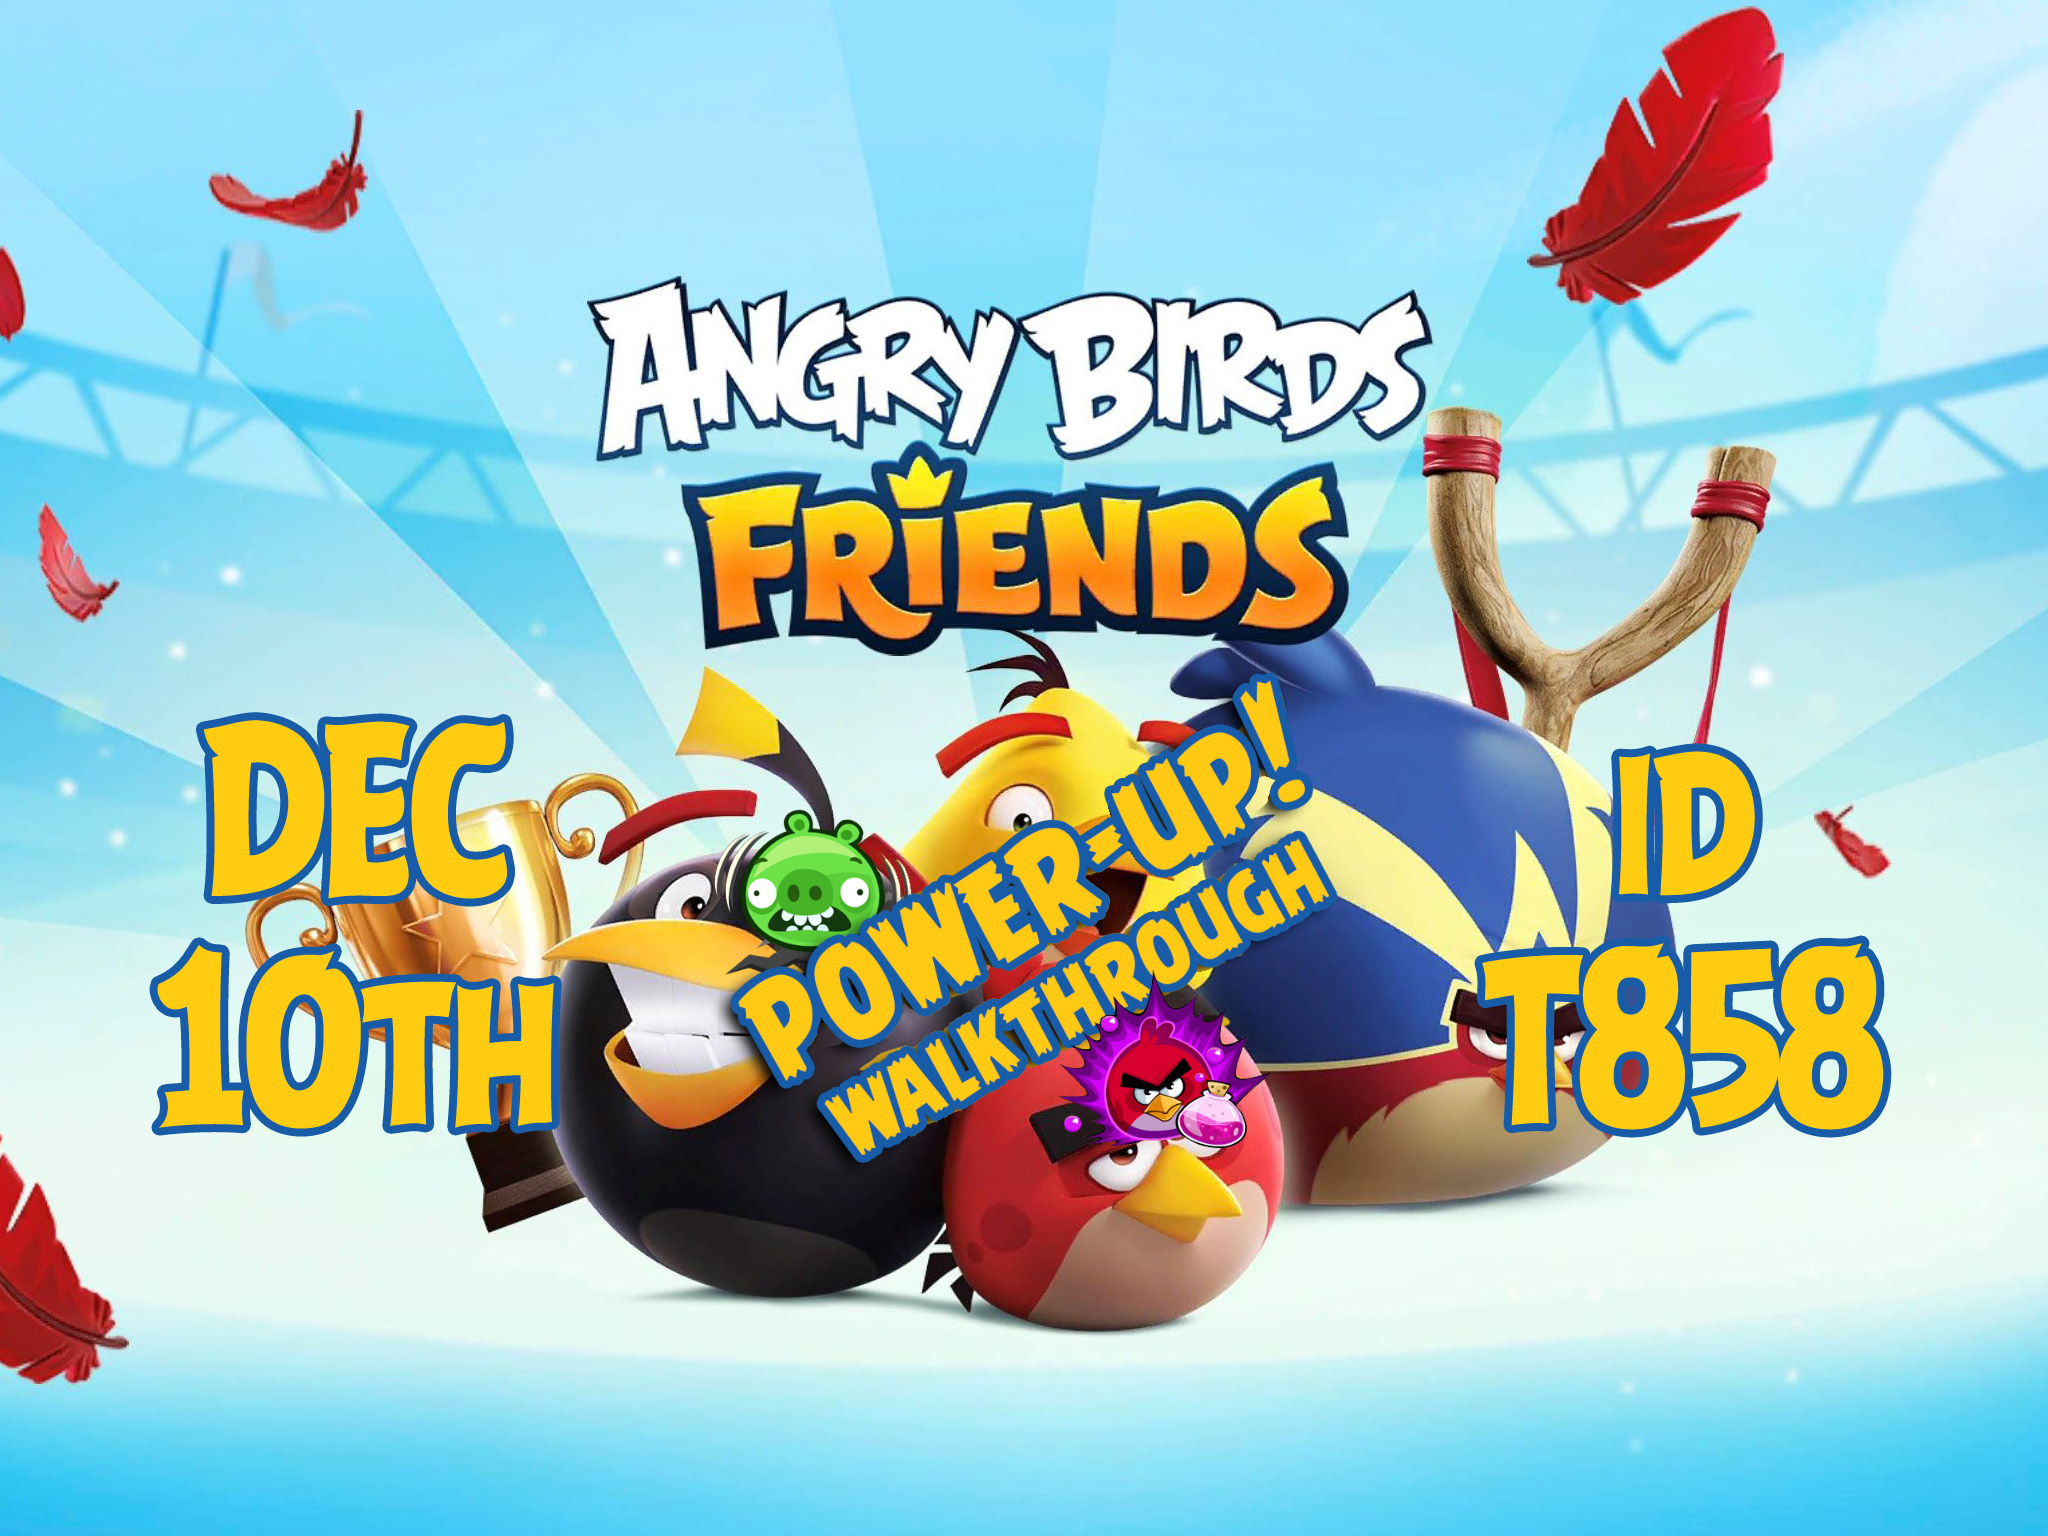 Angry-Birds-Friends-Tournament-T858-Feature-Image-PU